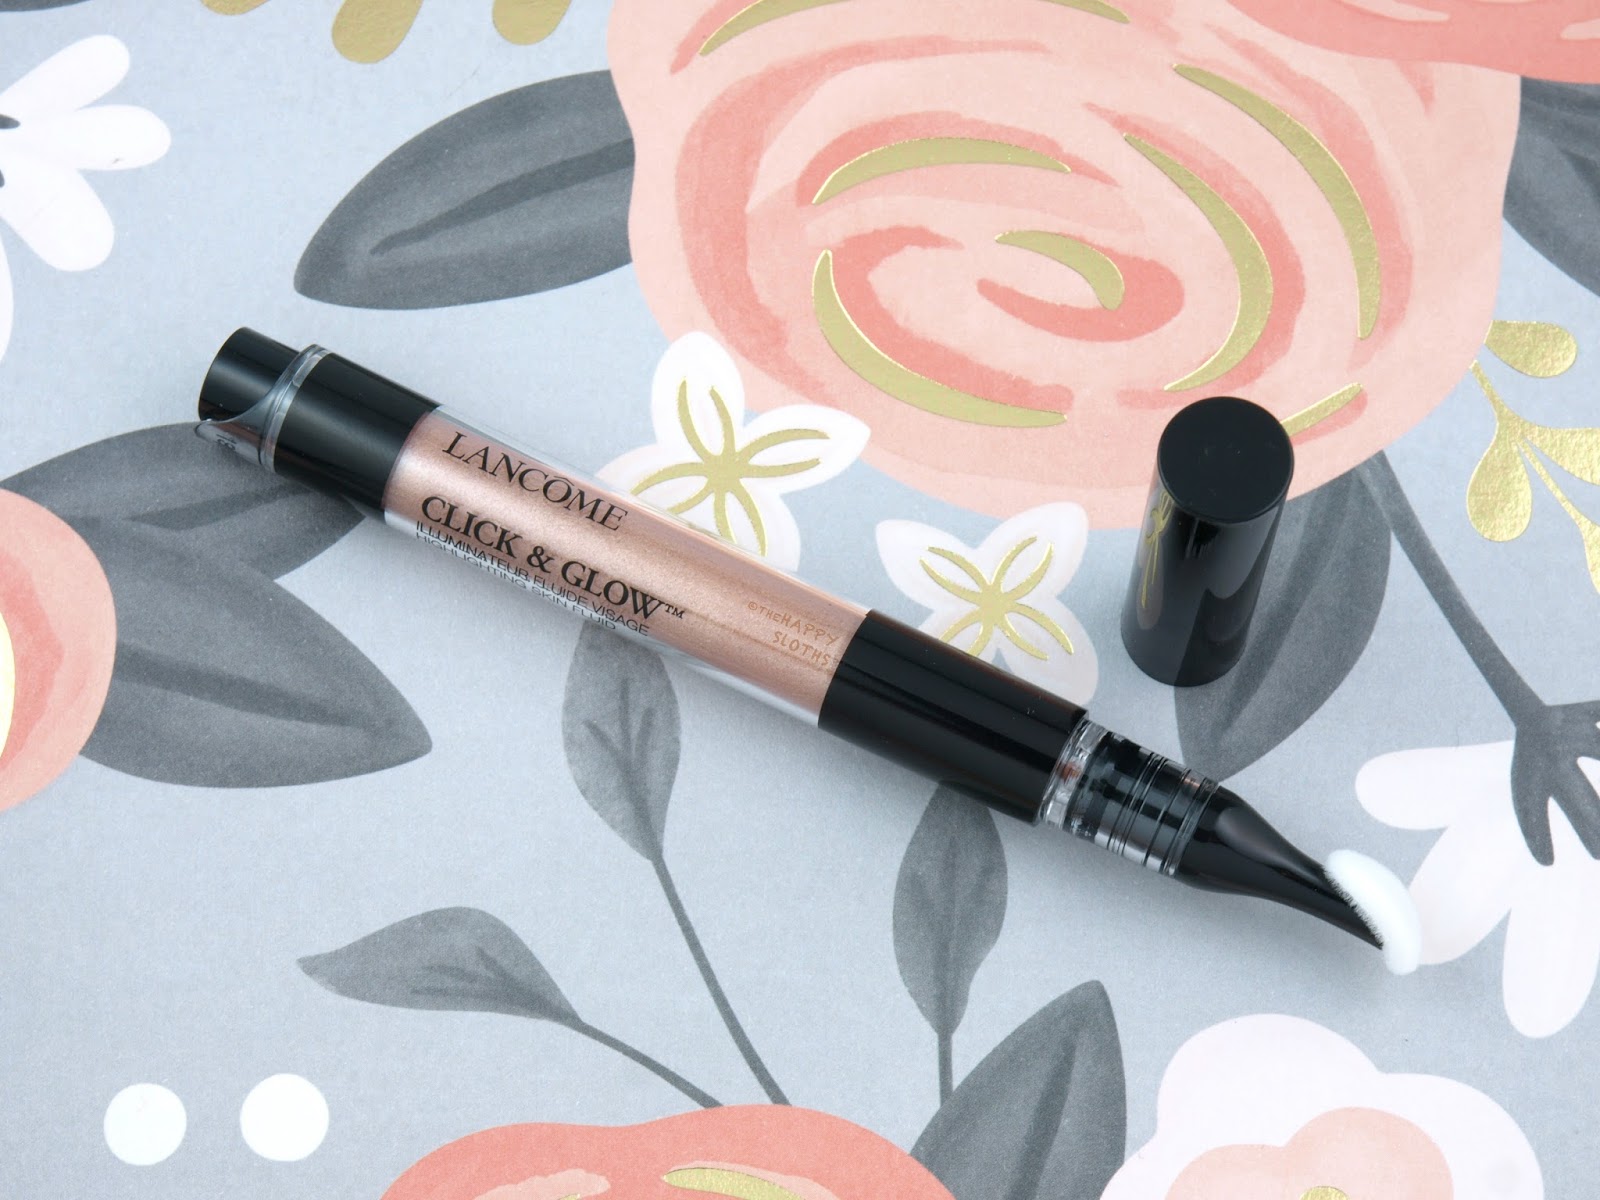 Lancome Click & Glow Highlighting Skin Fluid in "02 Lumieres D'Or Rose": Review and Swatches 